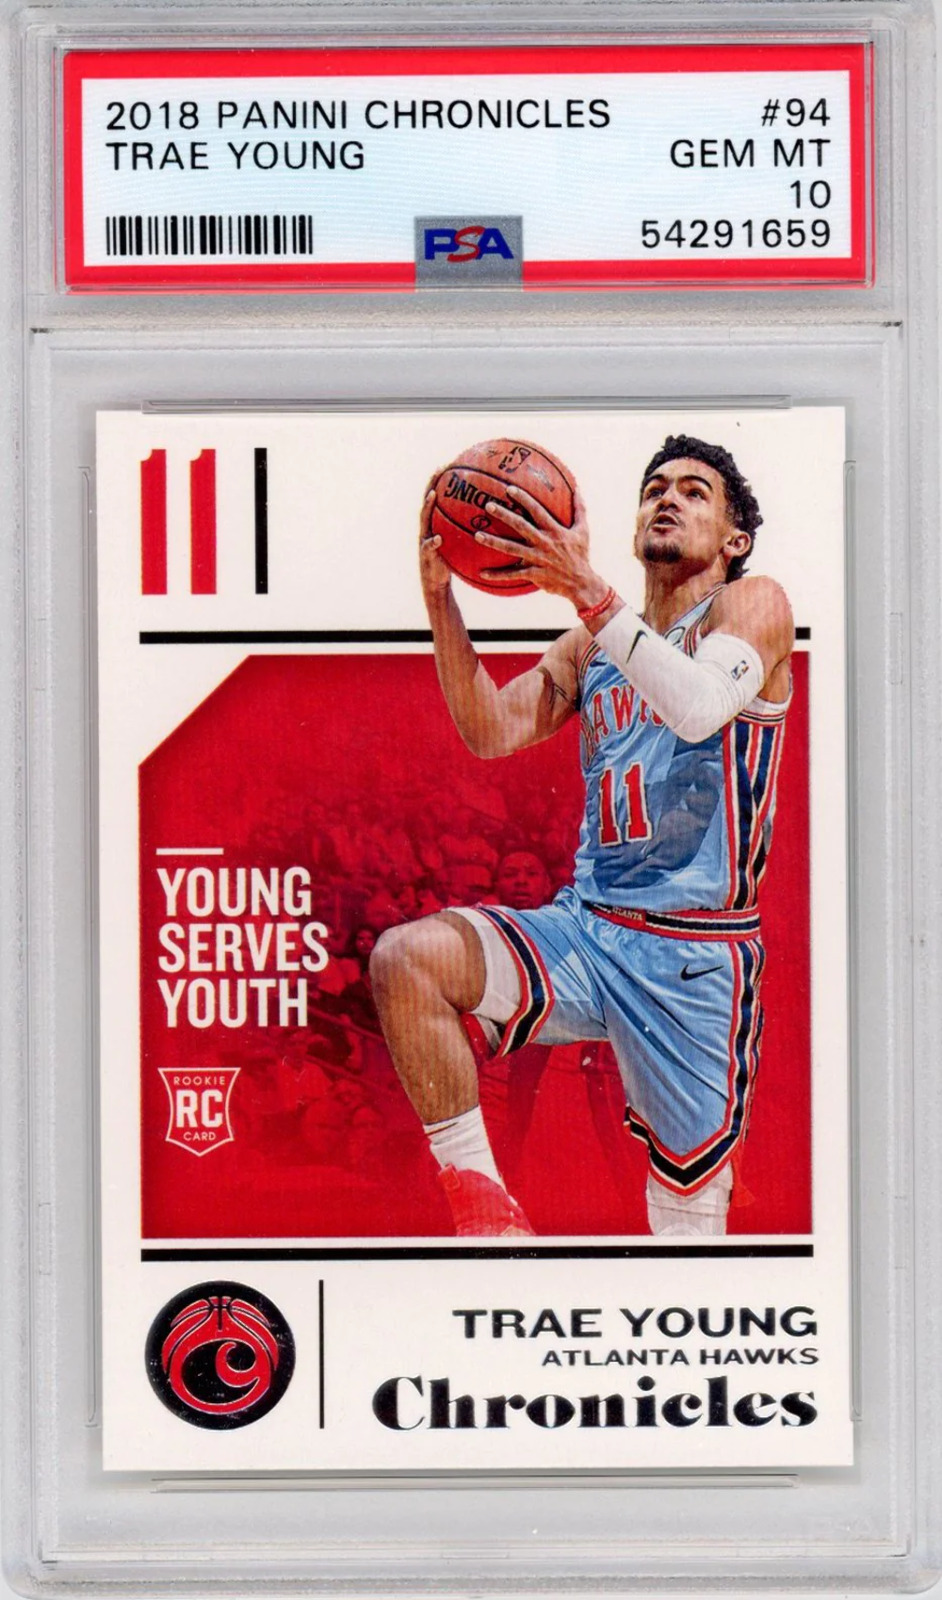 Graded 2018-19 Panini Chronicles Trae Young #94 Rookie RC Basketball Card PSA 10